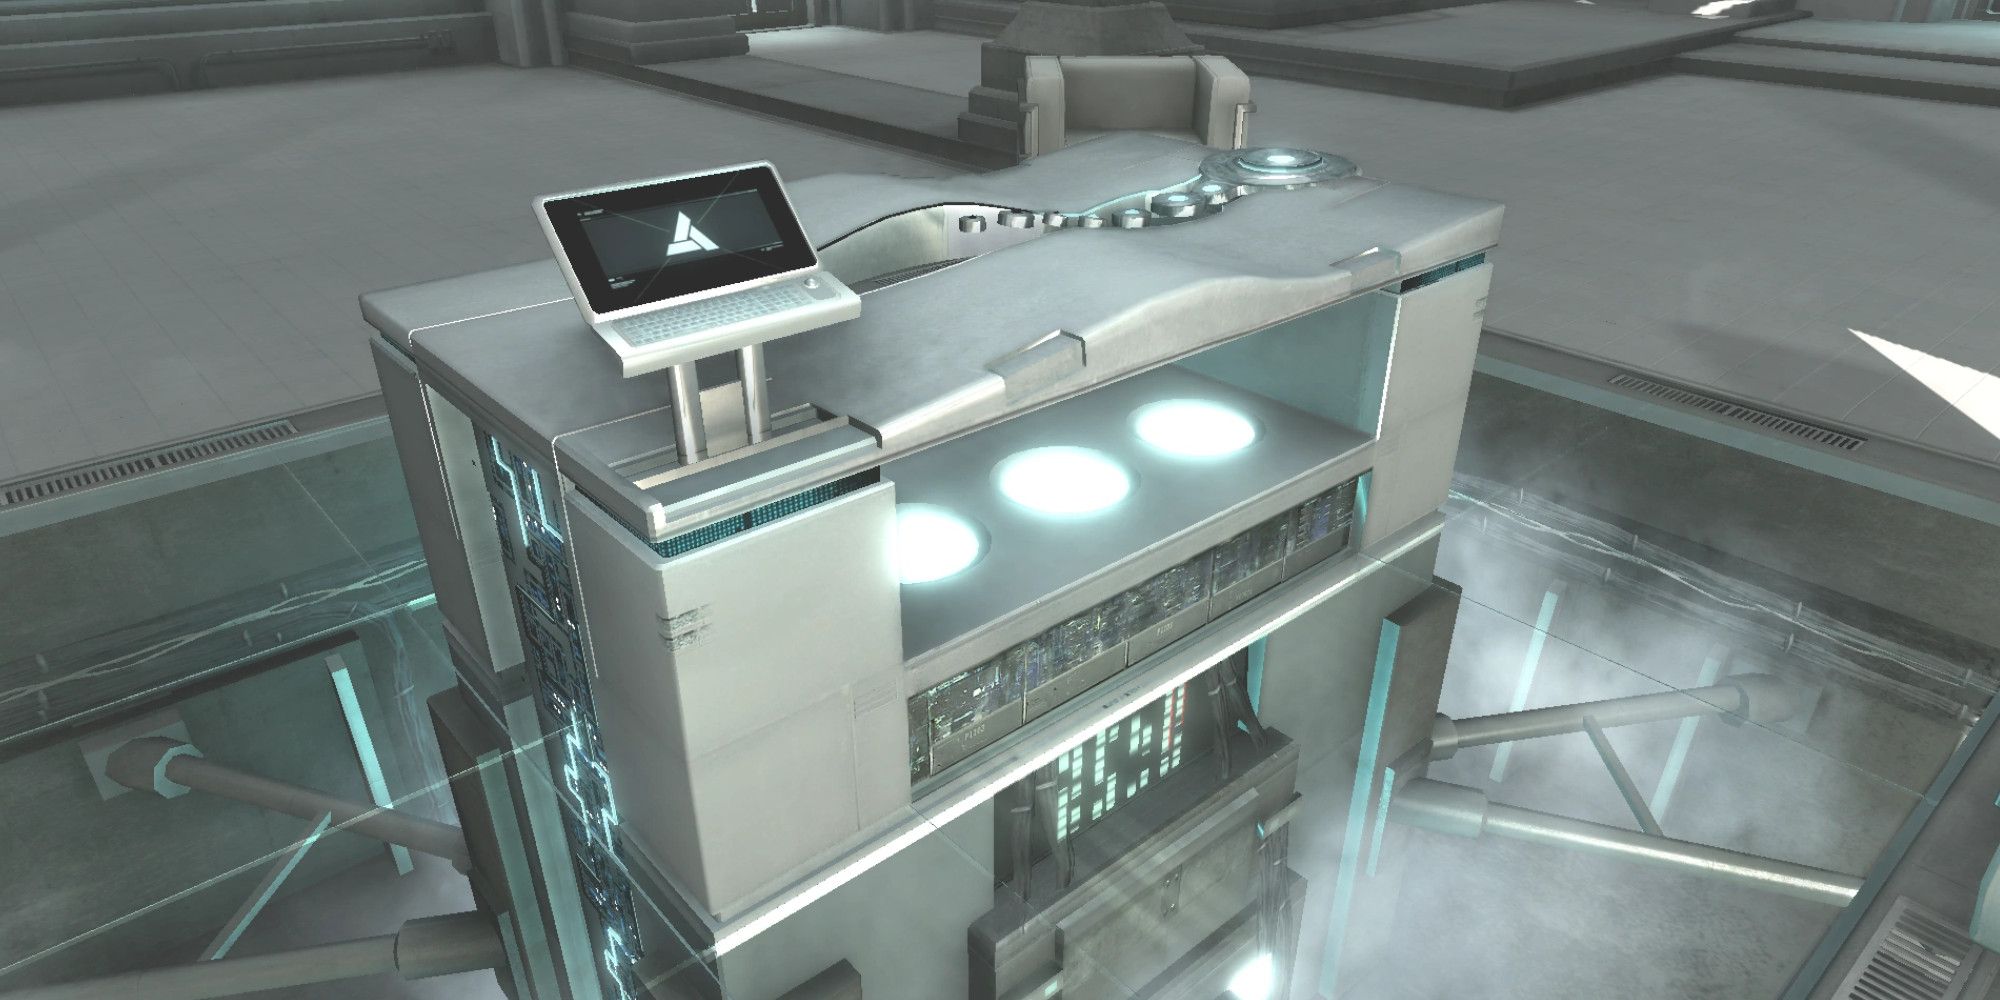 A high-tech animus from Abstergo